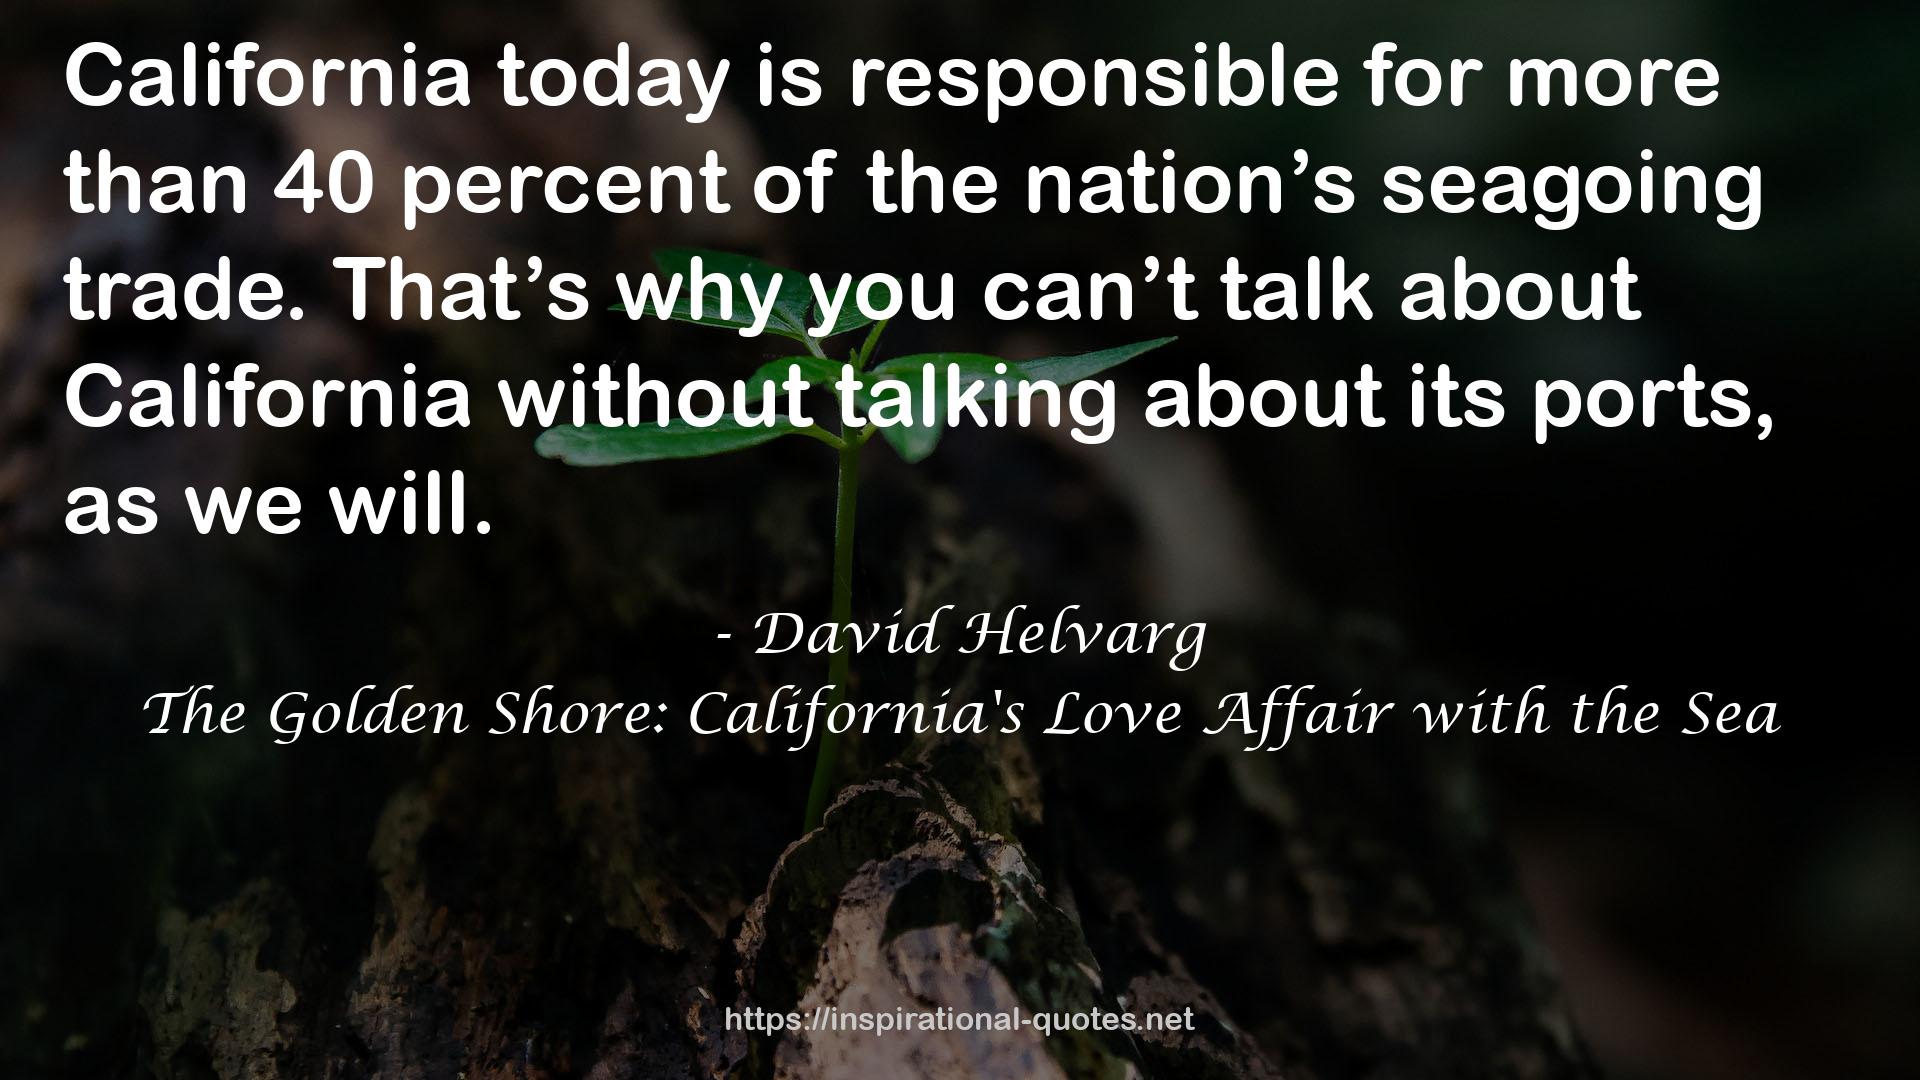 The Golden Shore: California's Love Affair with the Sea QUOTES